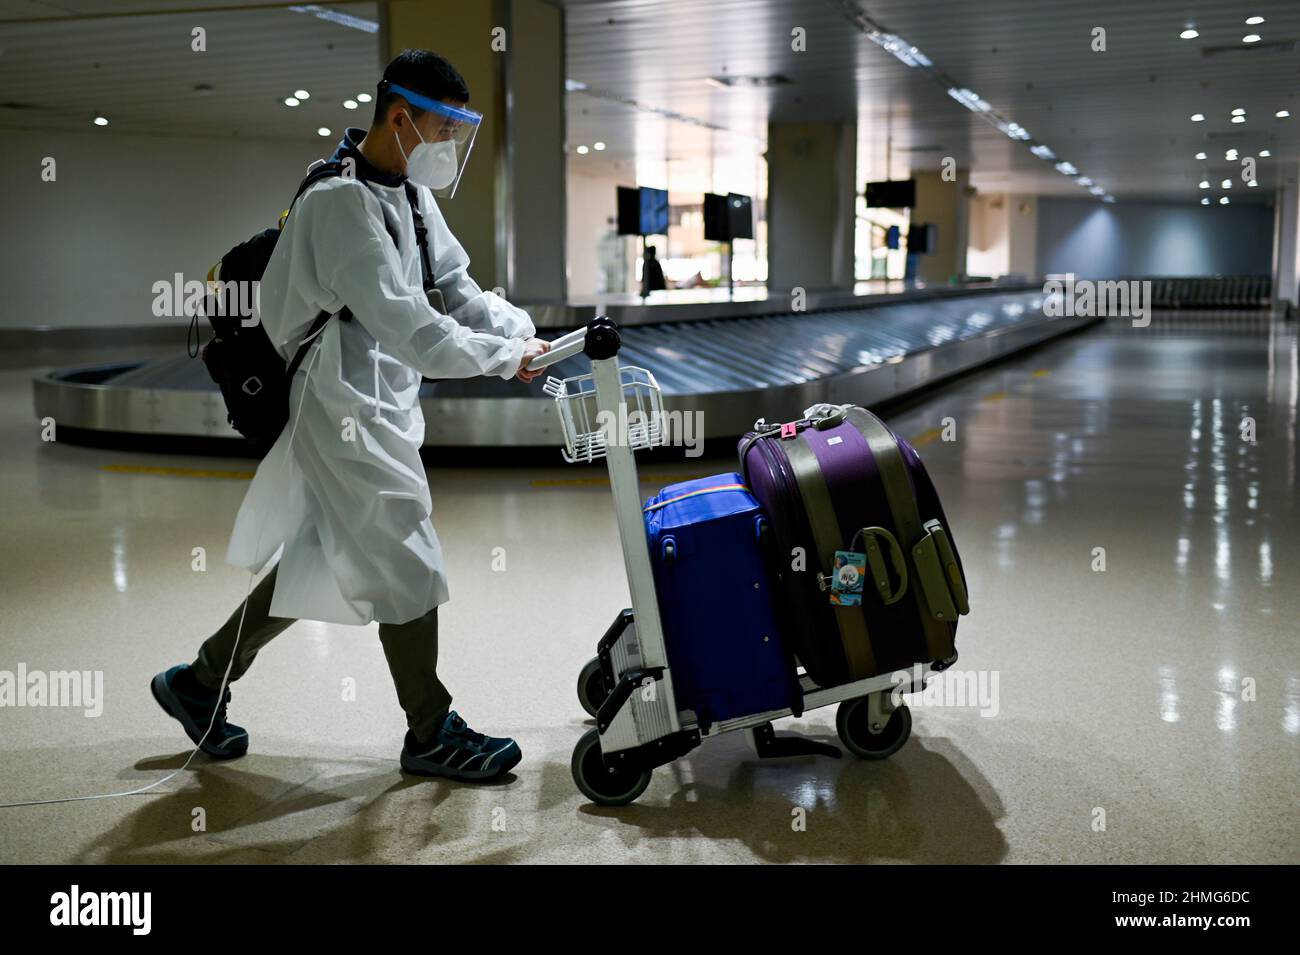 A foreign passenger wearing a face mask and a protective suit as protection  against the coronavirus disease (COVID-19) arrives at the Ninoy Aquino  International Airport, in Pasay City, Metro Manila, Philippines, February